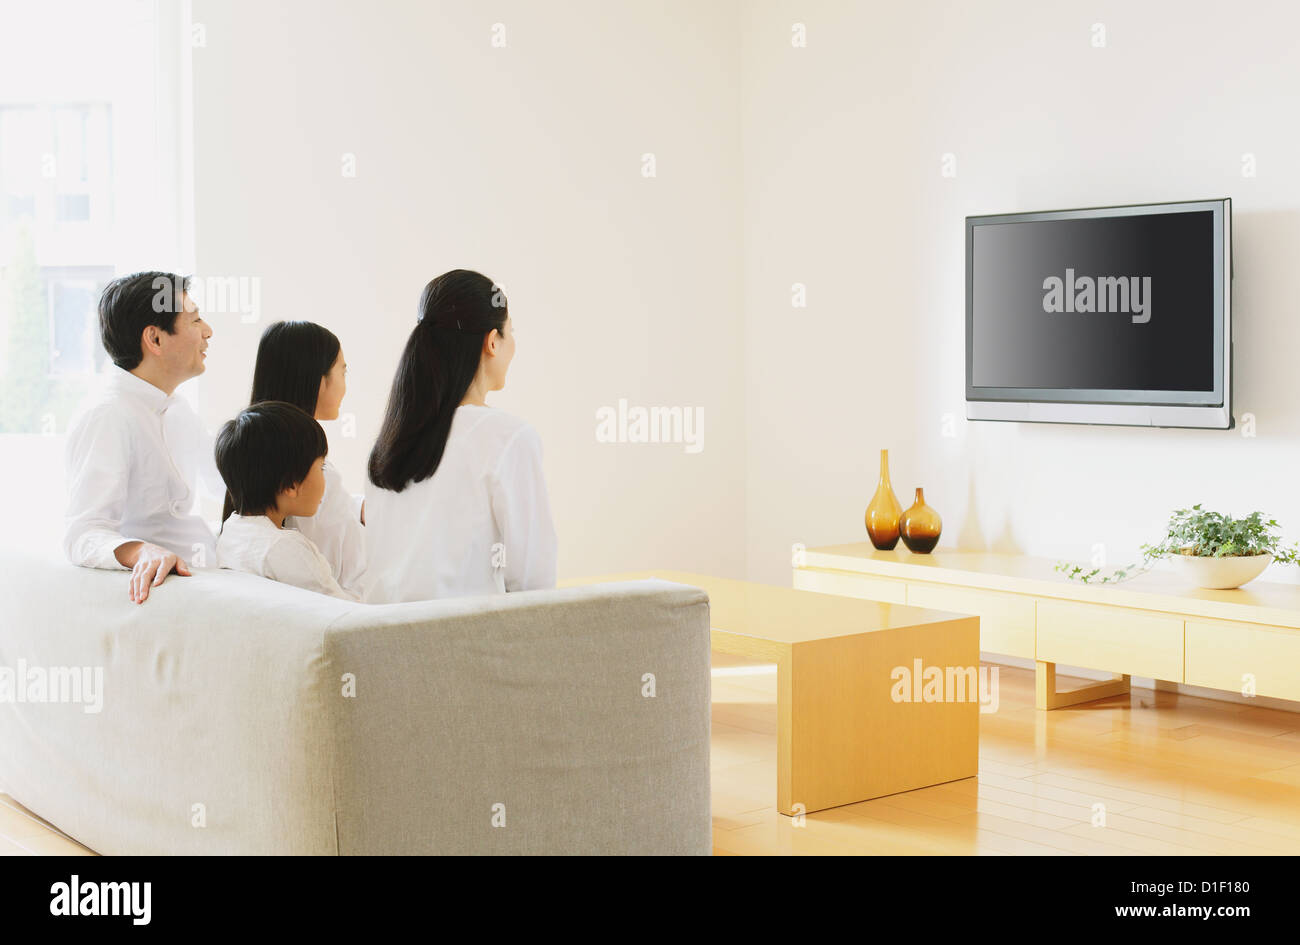 Family of four people watching TV on the sofa in the living room Stock Photo